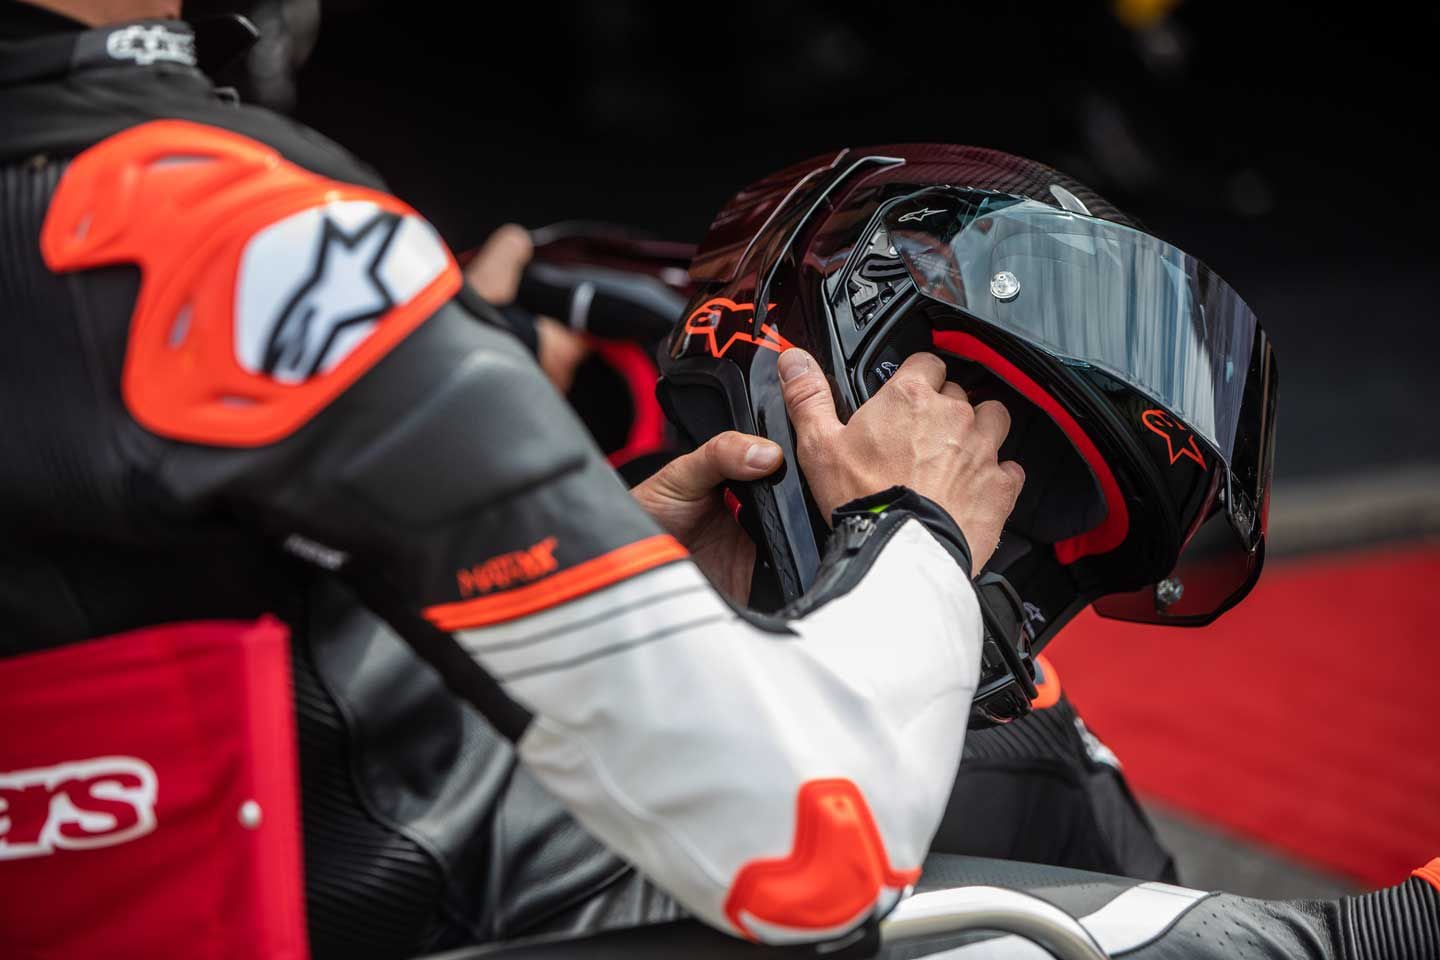 Inside the helmet (but not shown here) is Alpinestars’ A-Head Fitment System, which enables riders to customize the fit for increased comfort or correct angle during track or street riding. Adjustments take less than a minute.